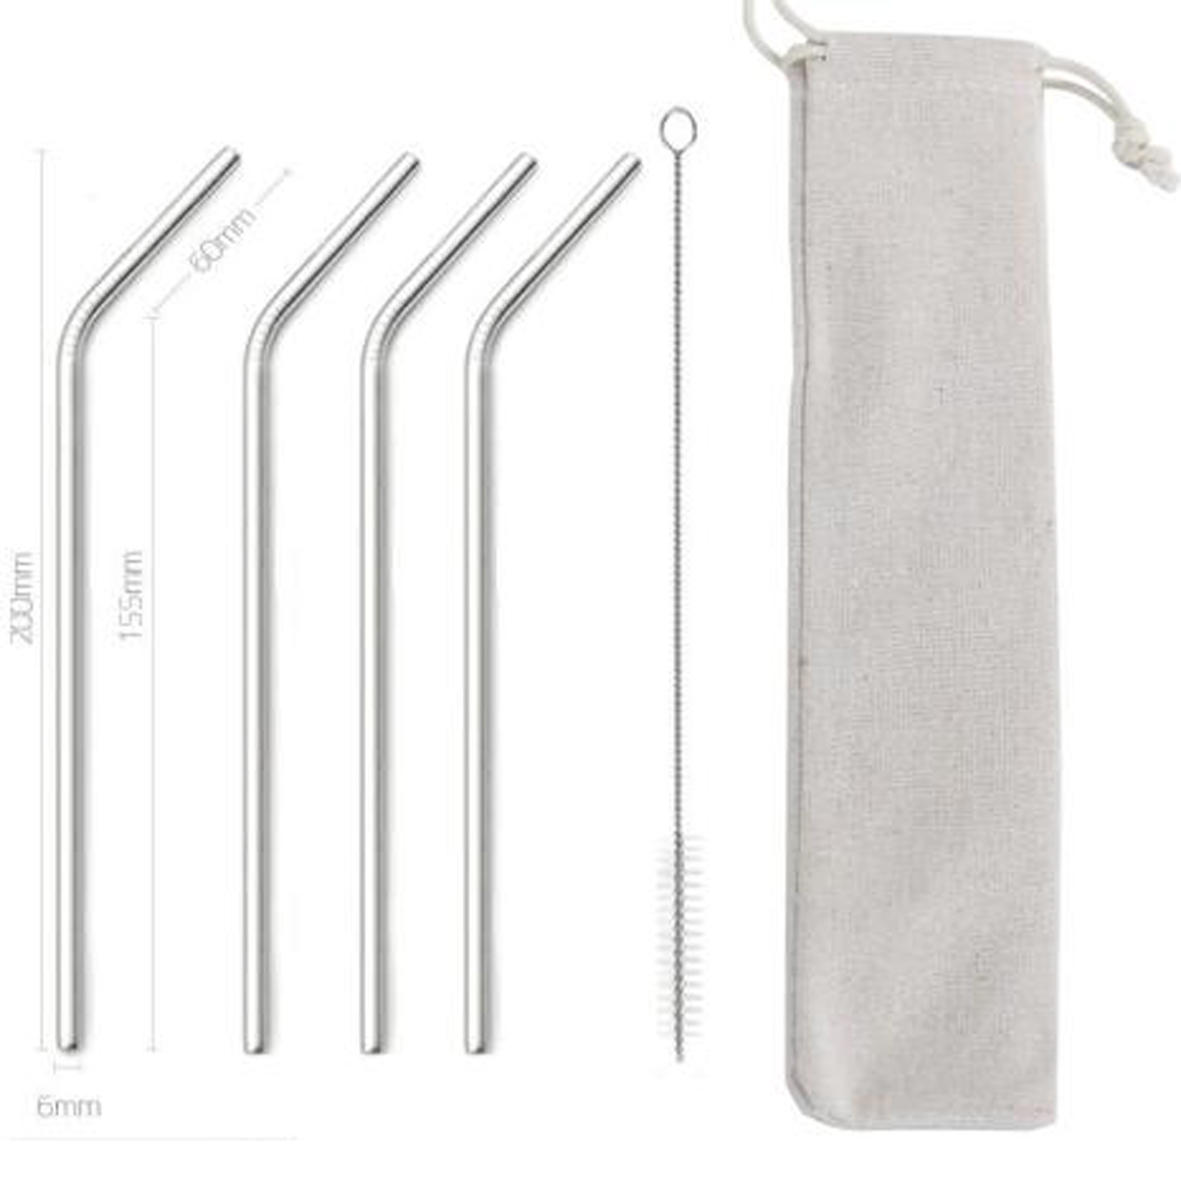 GL-ELY1254 5 in 1 Curved Stainless Steel Straw Set